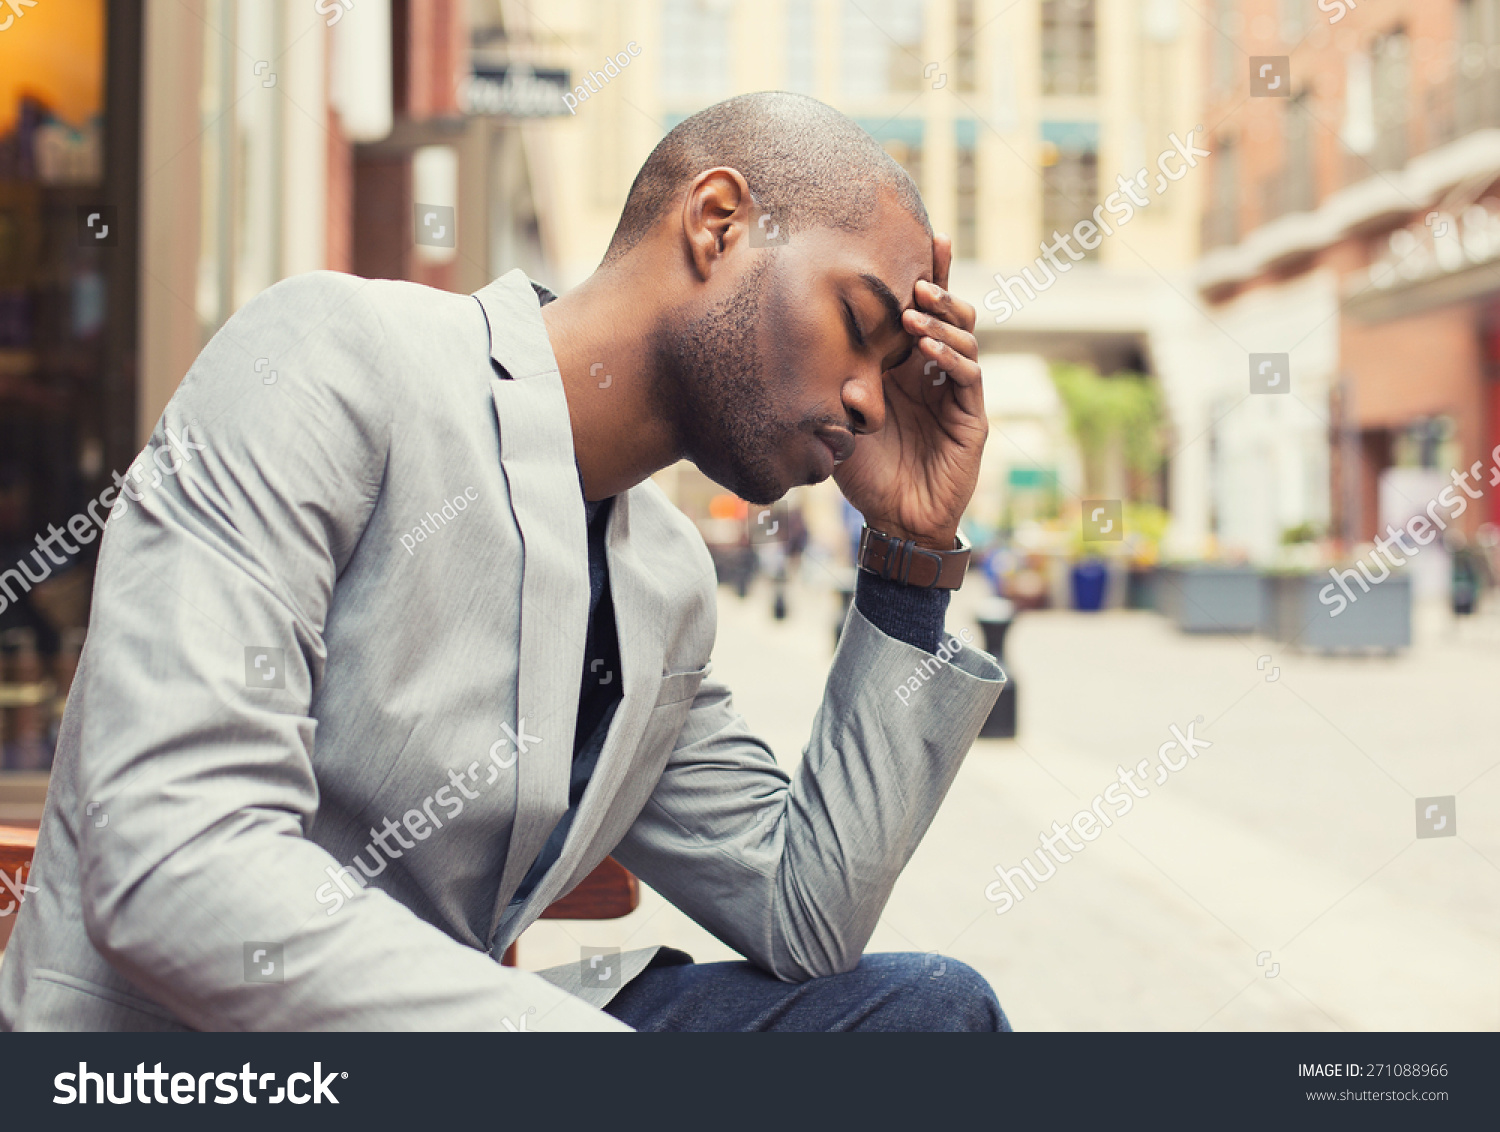 Portrait stressed young man hands on head with bad headache isolated city street background. Negative human emotion facial expression feeling #271088966